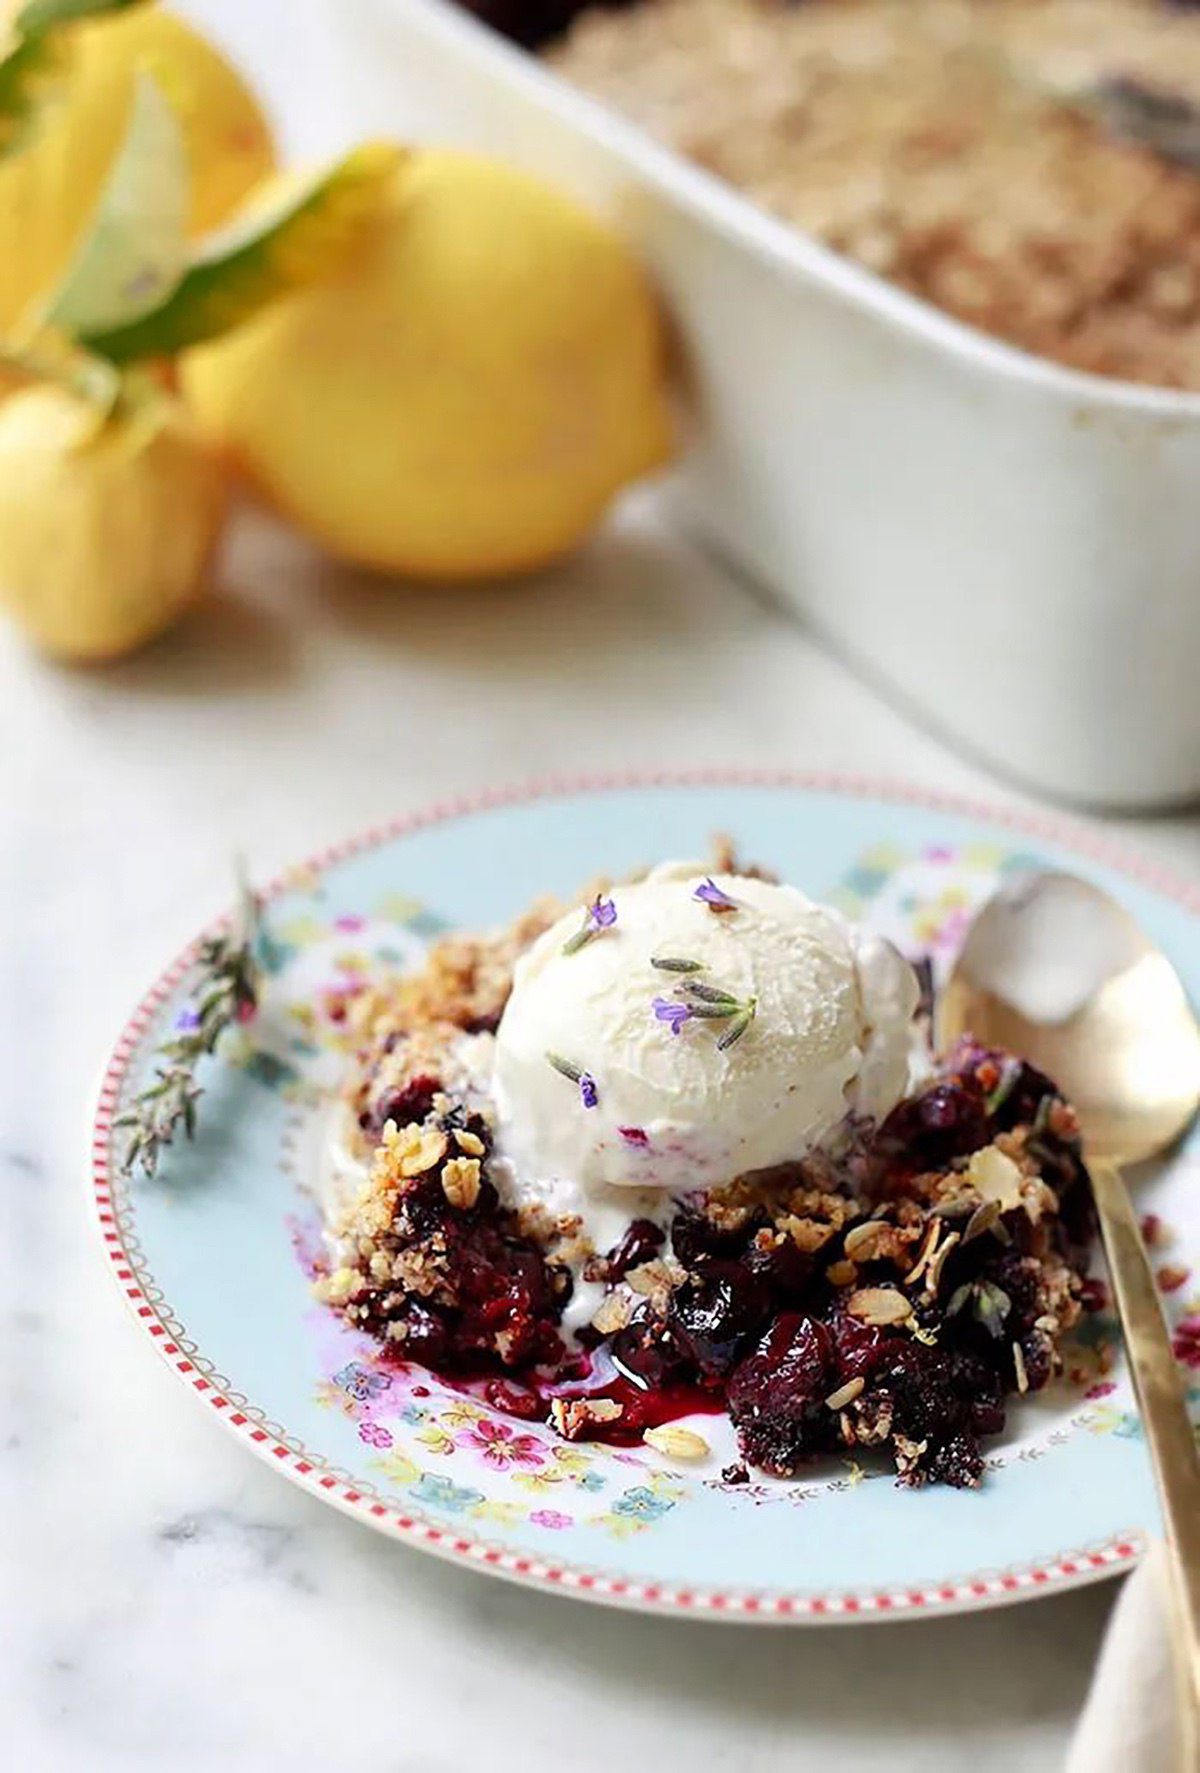 Blueberry Crisp with Almond Oatmeal Topping